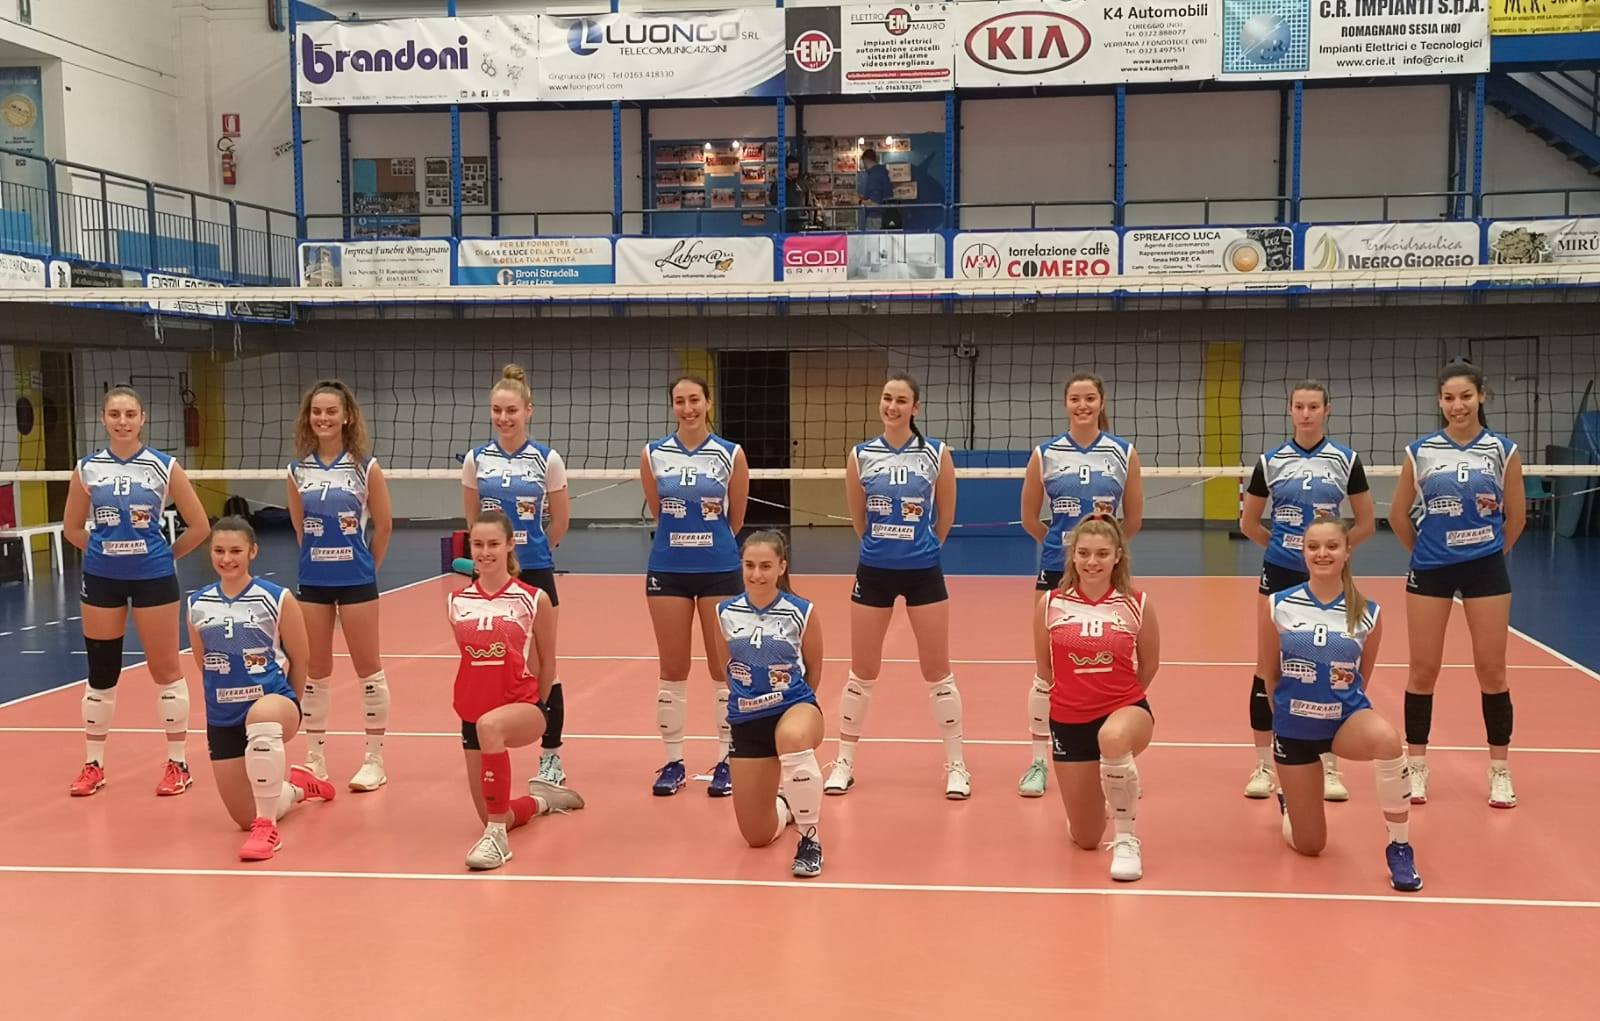 G.S. PAVIC - Canavese Volley IVREA 3 - 0